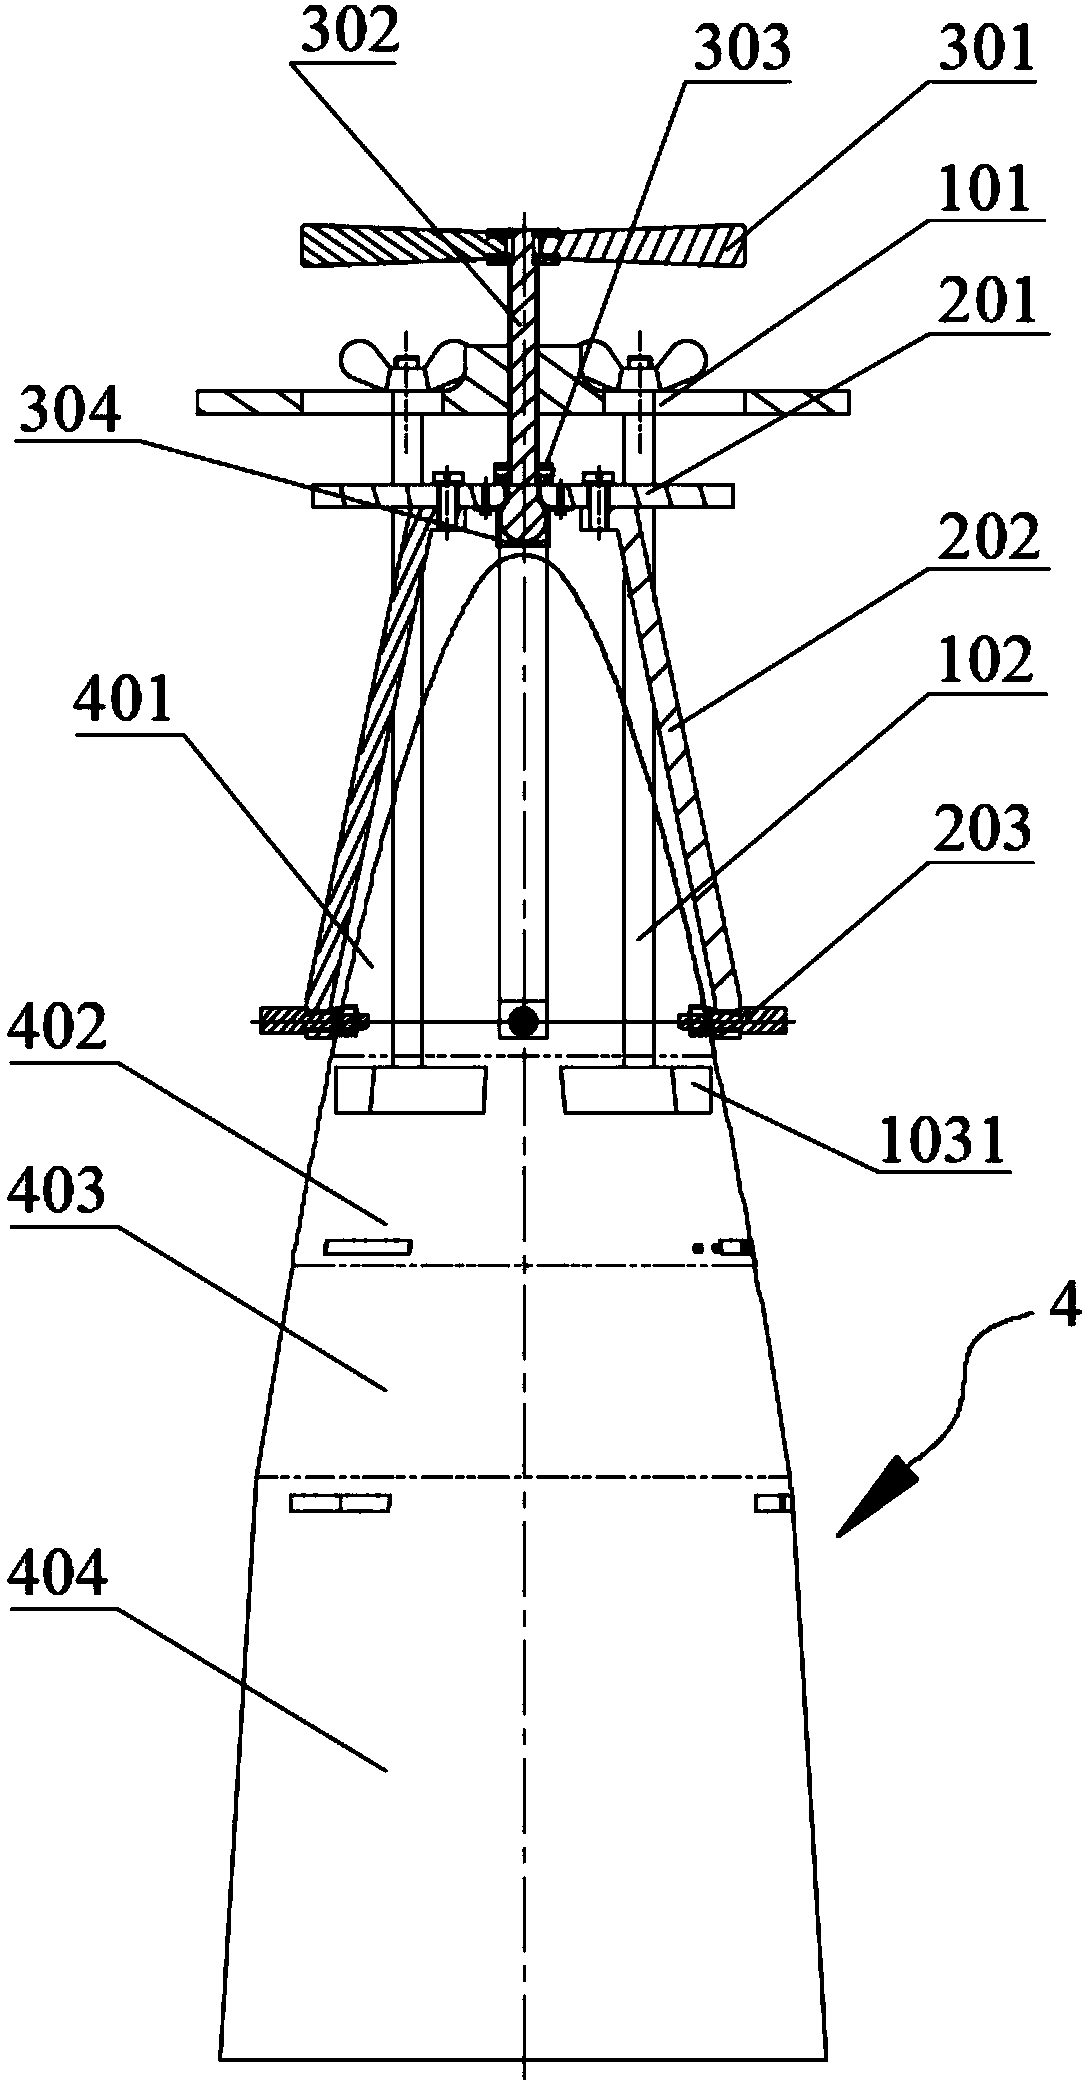 Disassembling device suitable for cone shell assembly